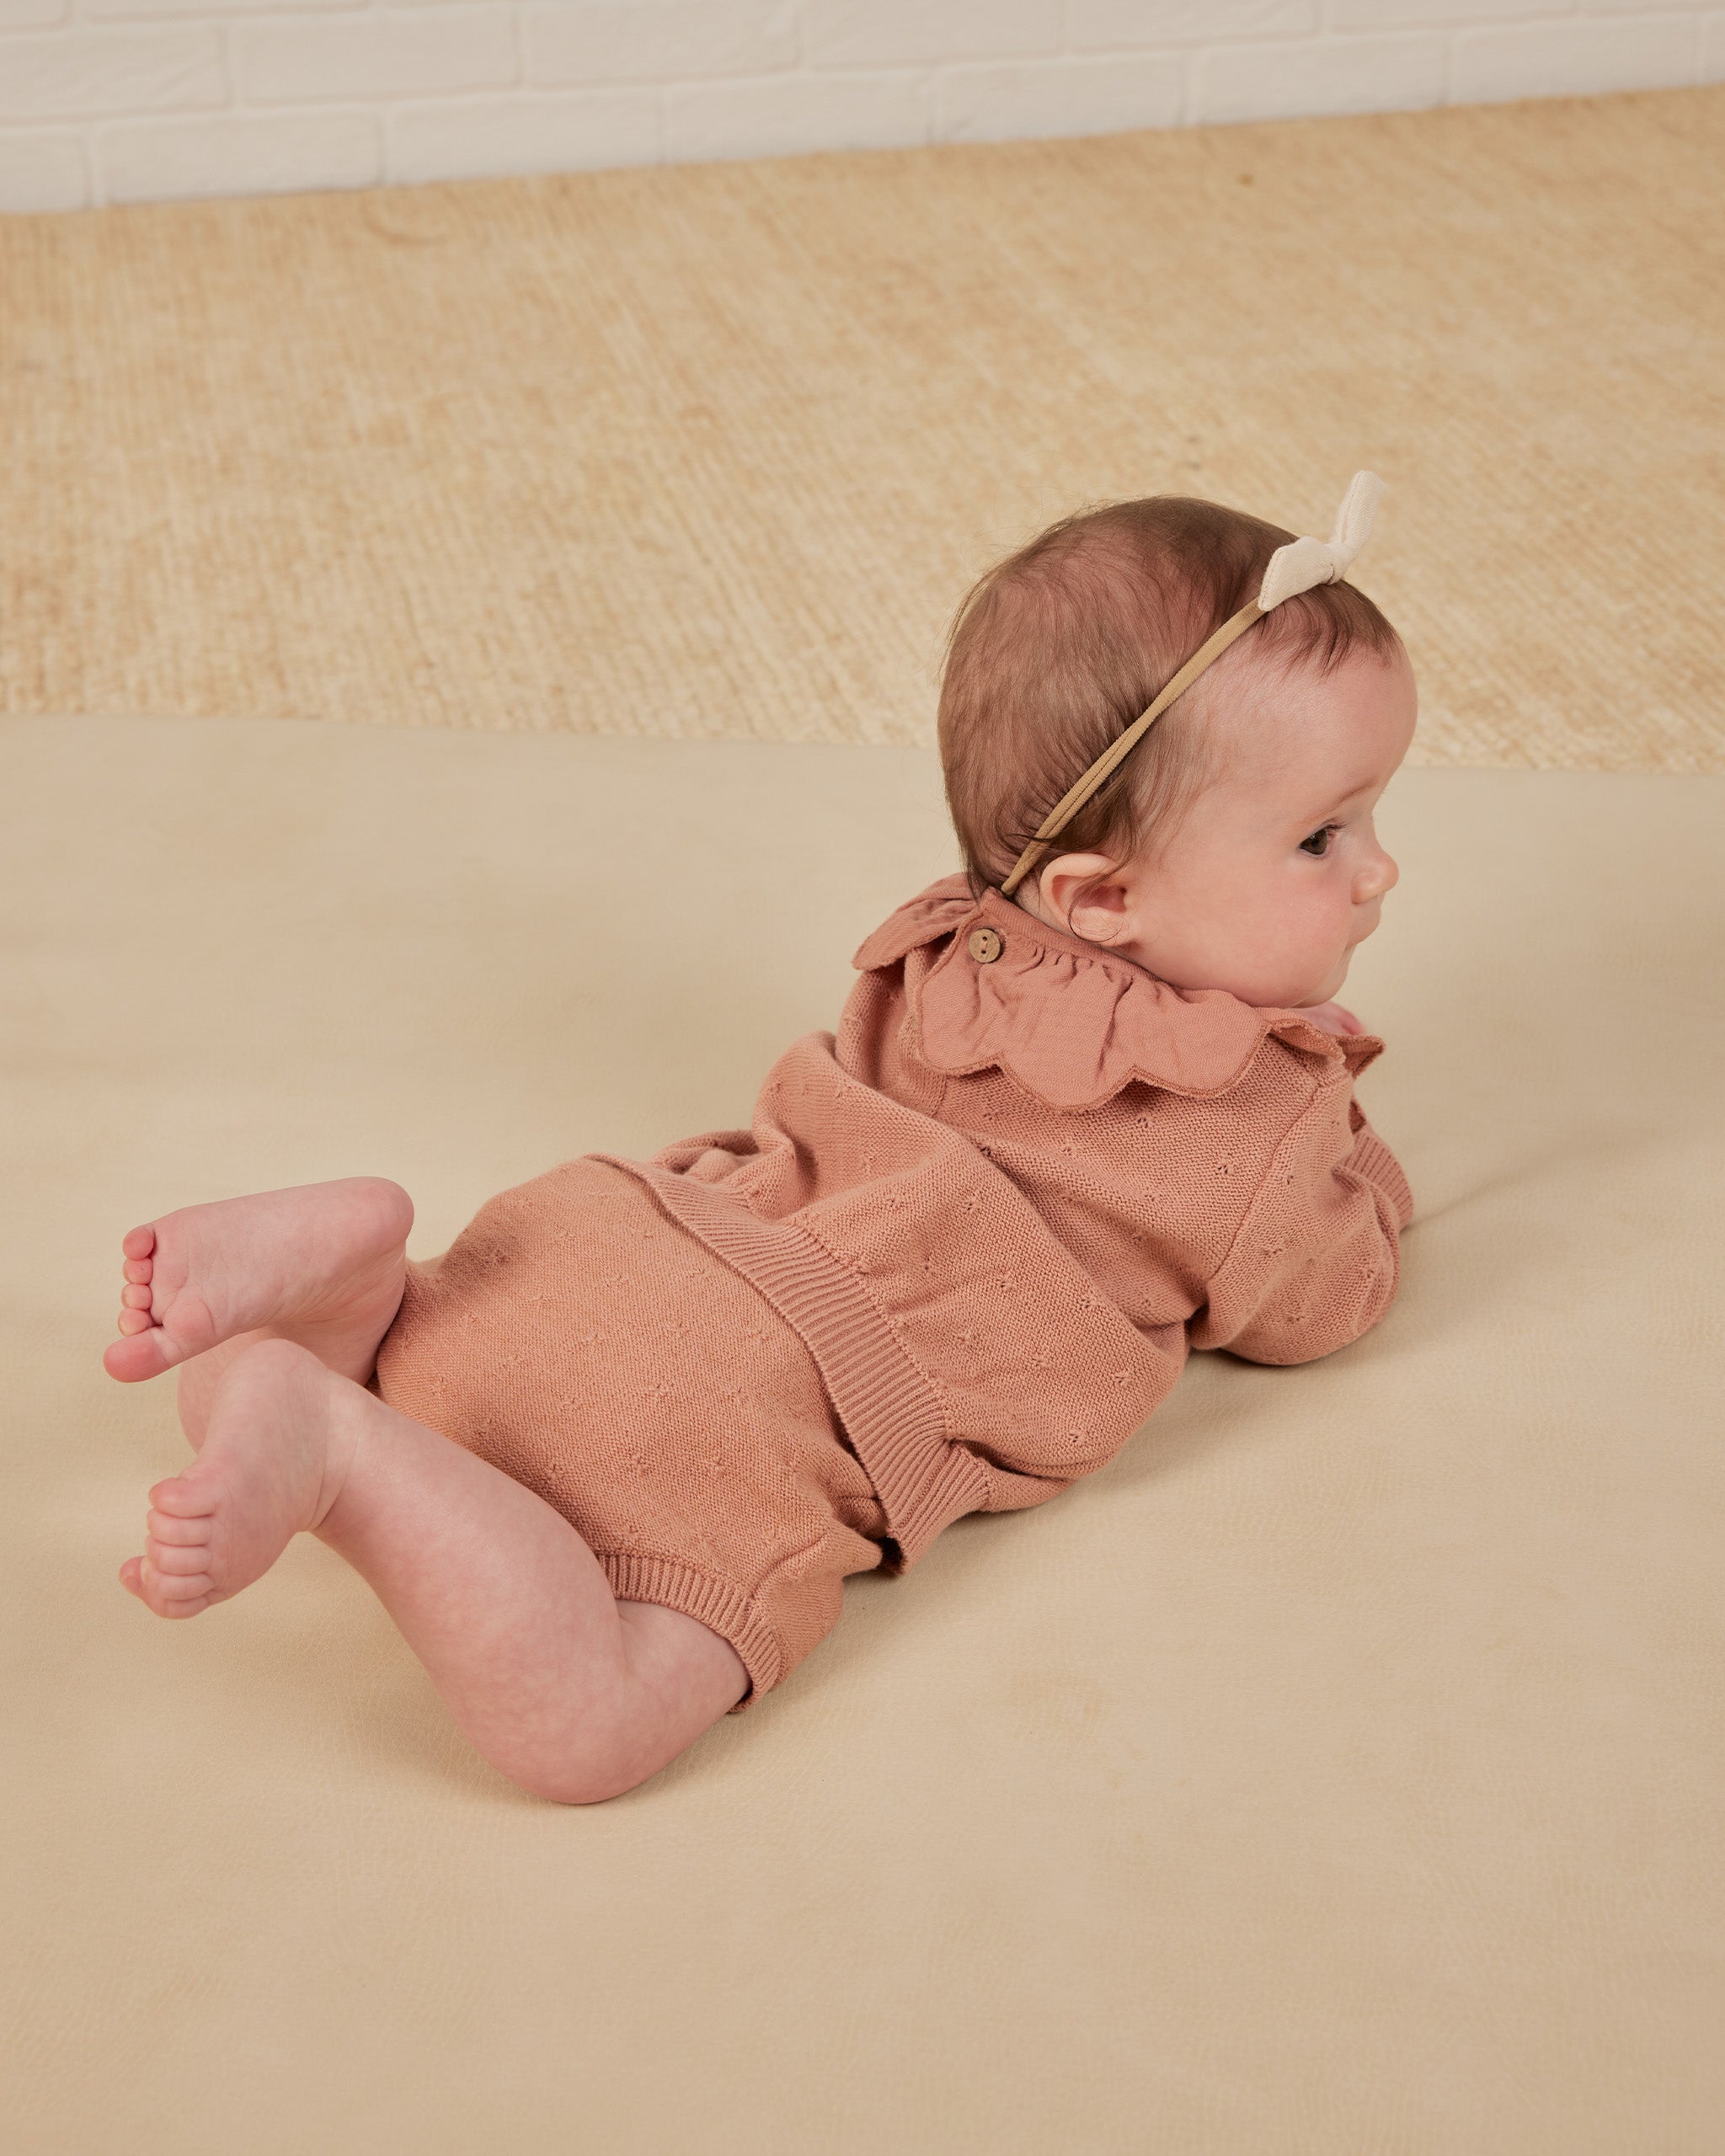 Petal Knit Sweater || Rose - Rylee + Cru | Kids Clothes | Trendy Baby Clothes | Modern Infant Outfits |